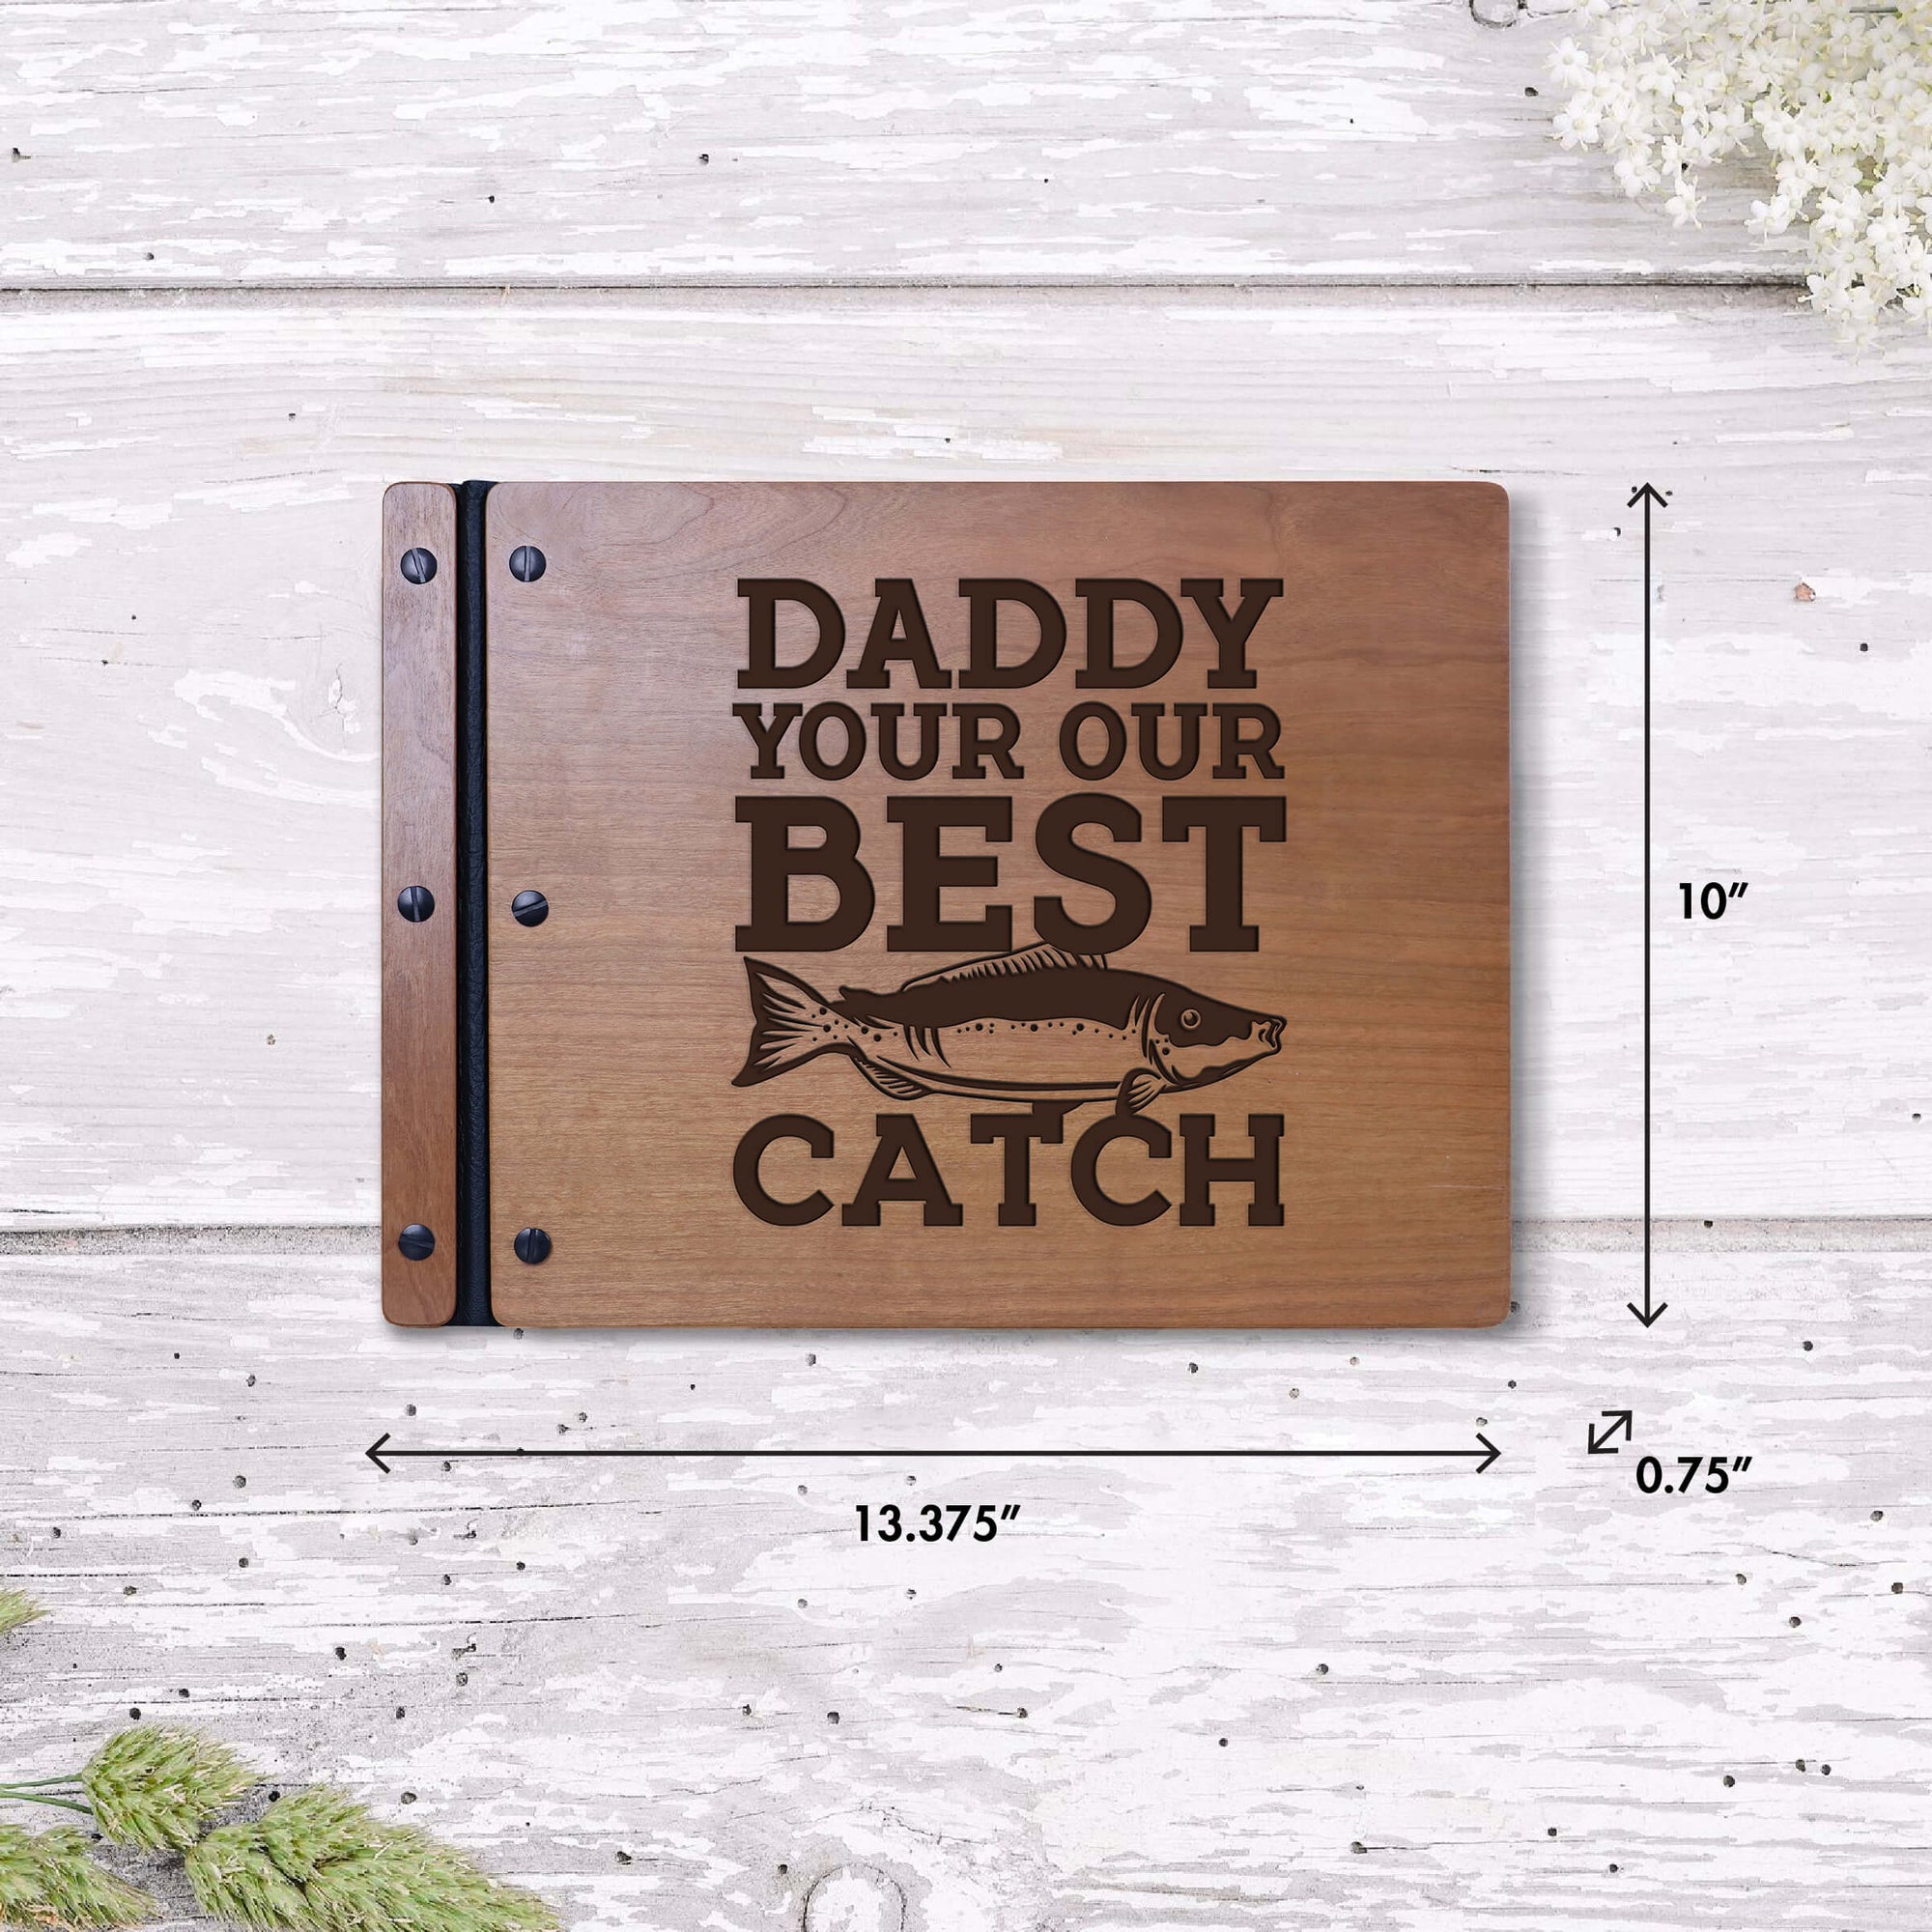 Wooden Memorial Large Guestbook with Fisherman Verse for Funeral Service - Daddy Your Our Best Catch